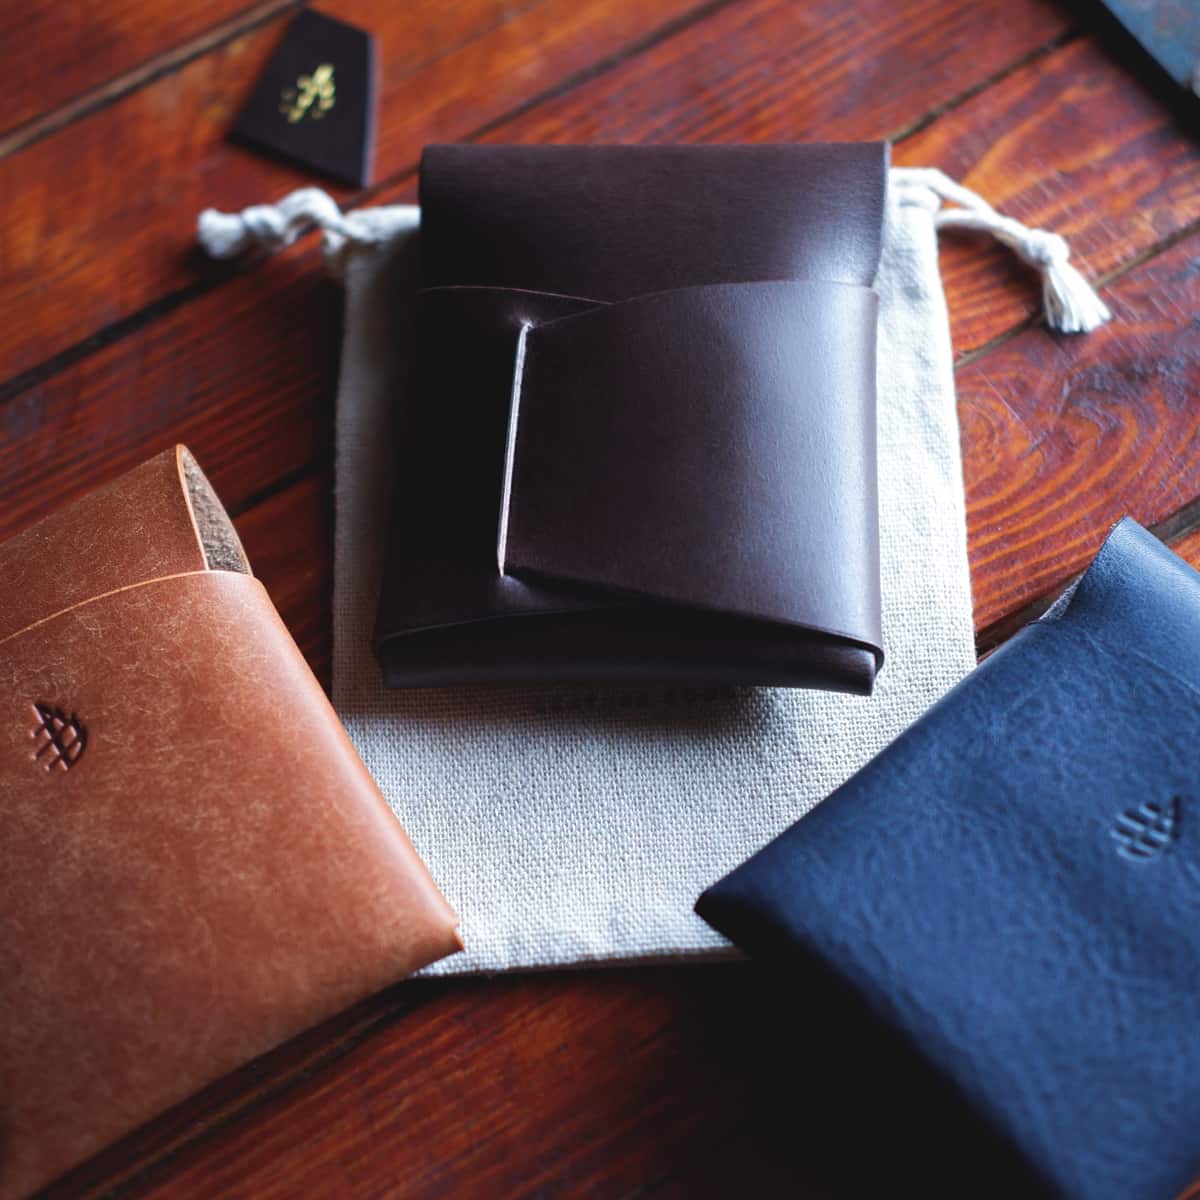 The Lodgepole Stitchless Wallet in Cullata Cavallo leather - back side